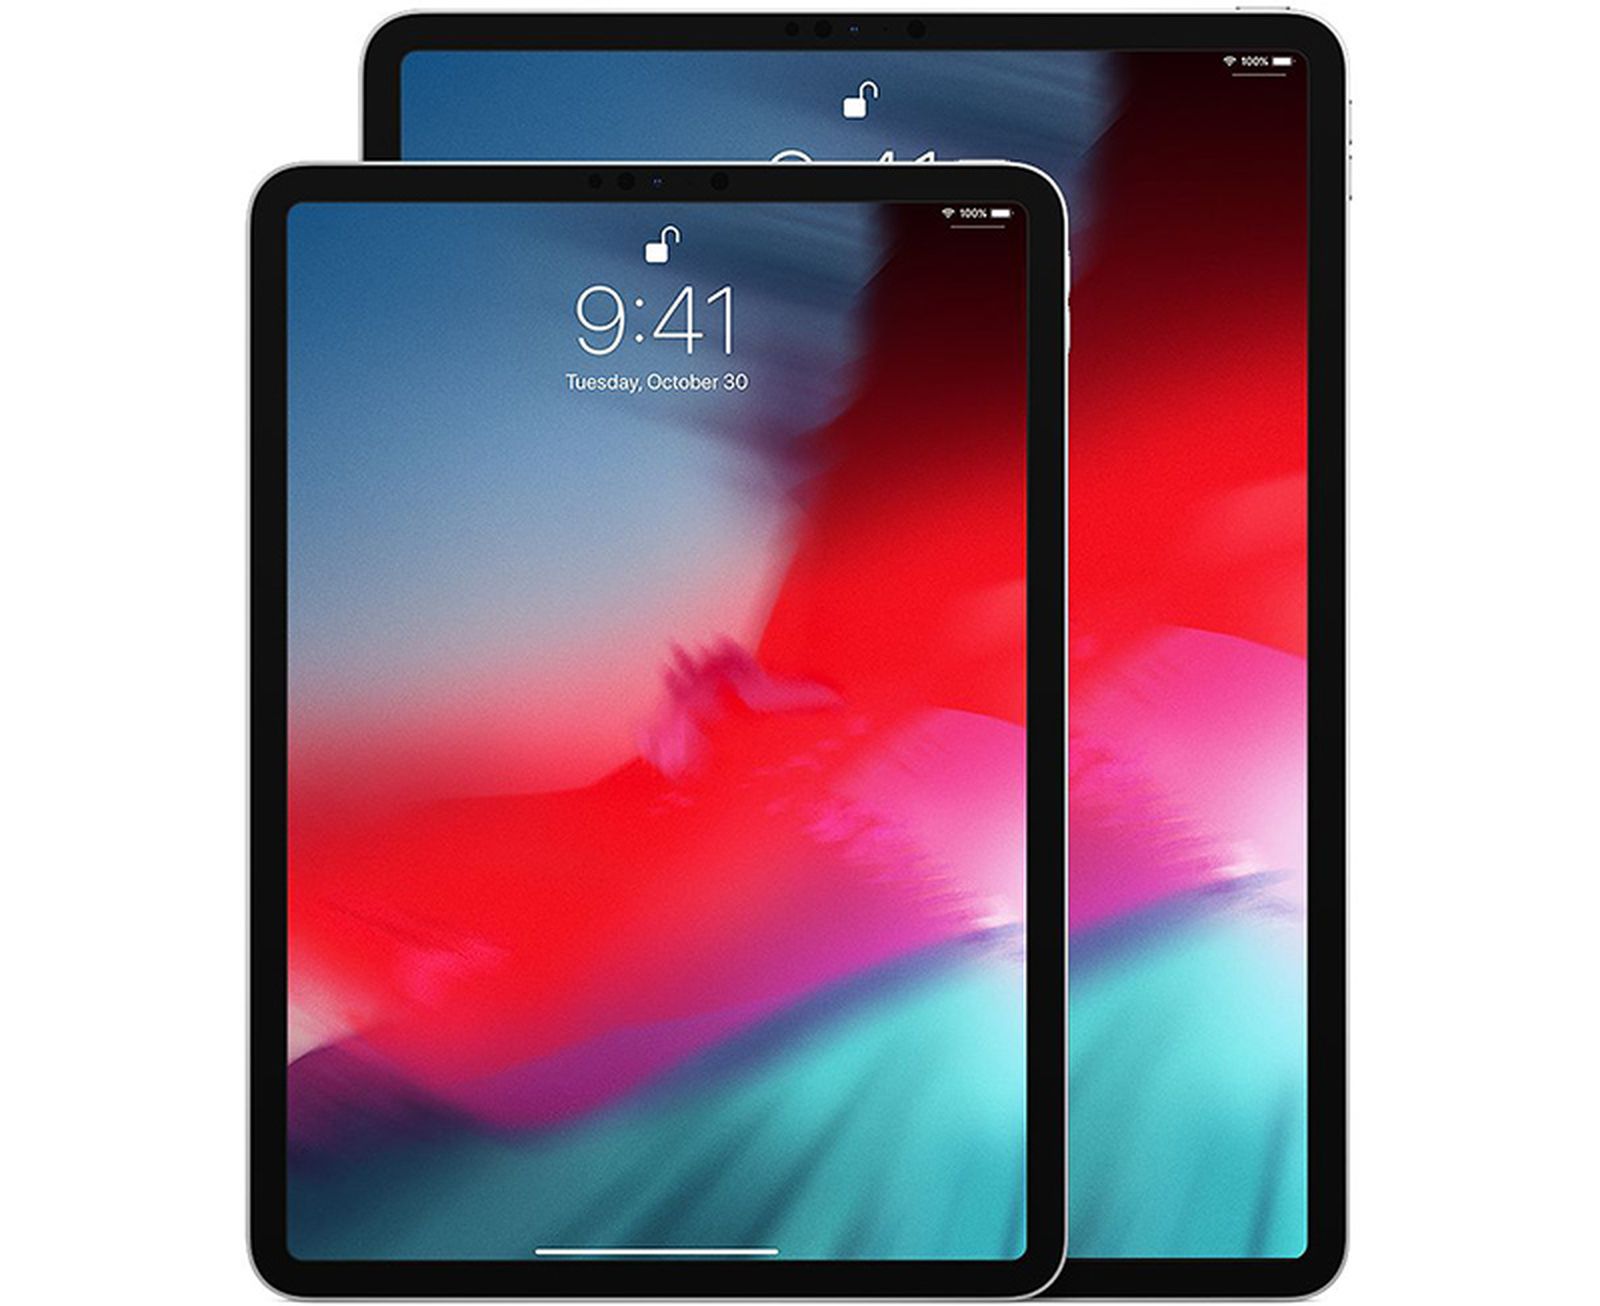 Four New Ipad Pro Models Spotted In Chinese User Manual On Apple S